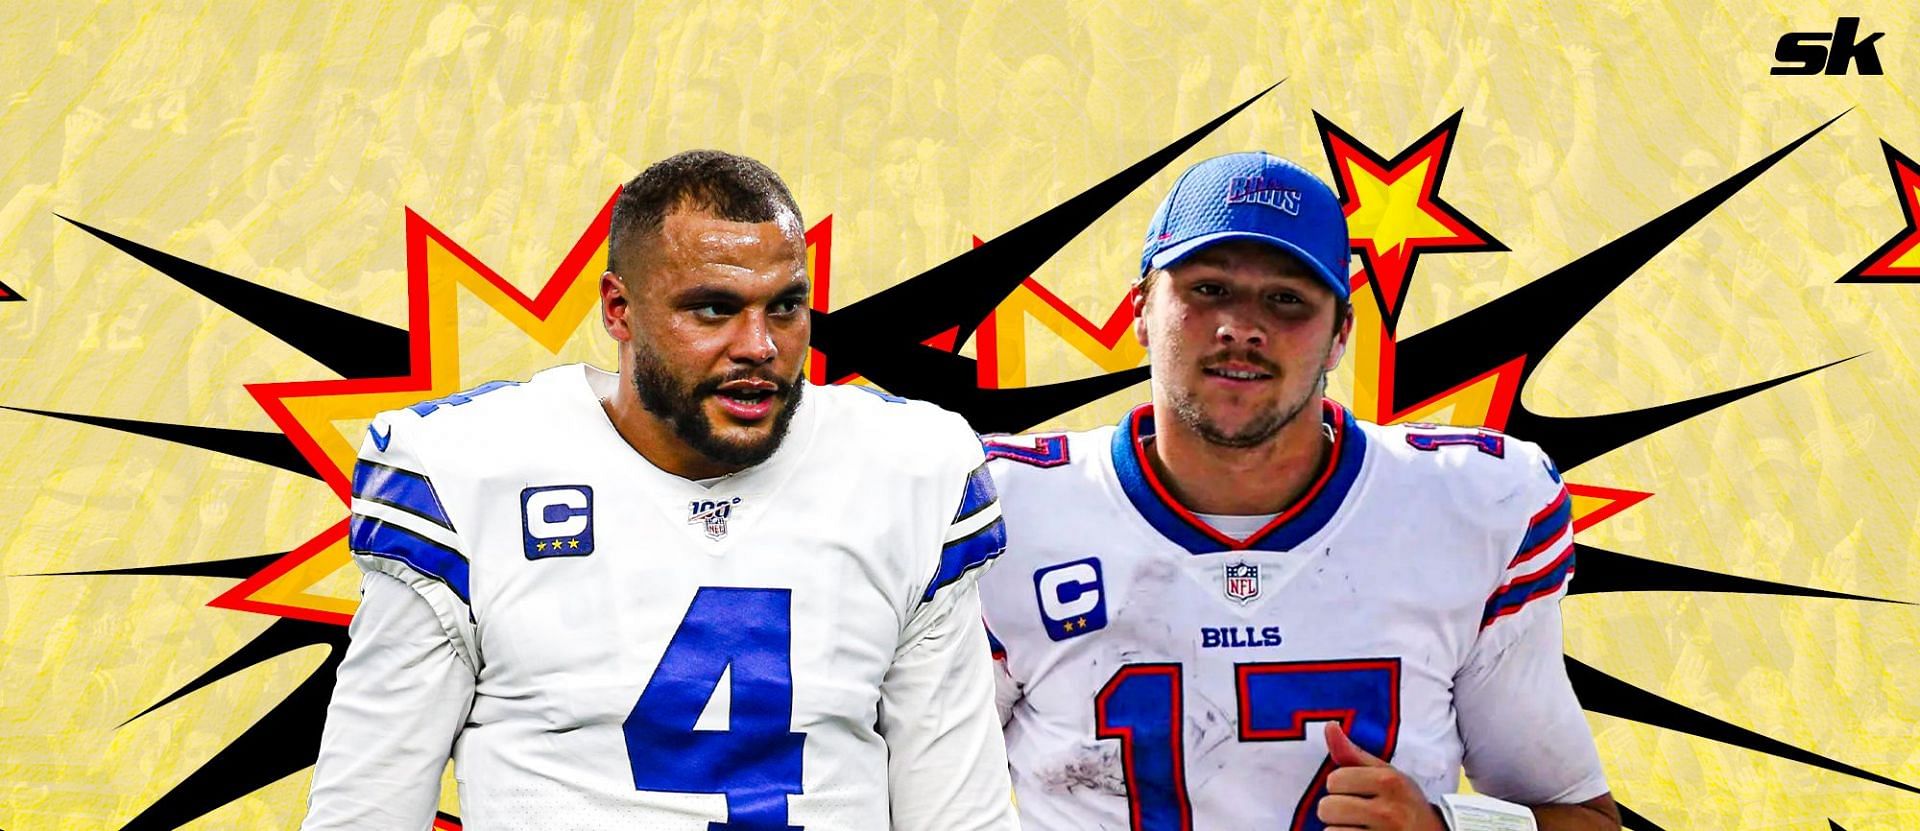 Check out the newest version of the NFL Power Rankings